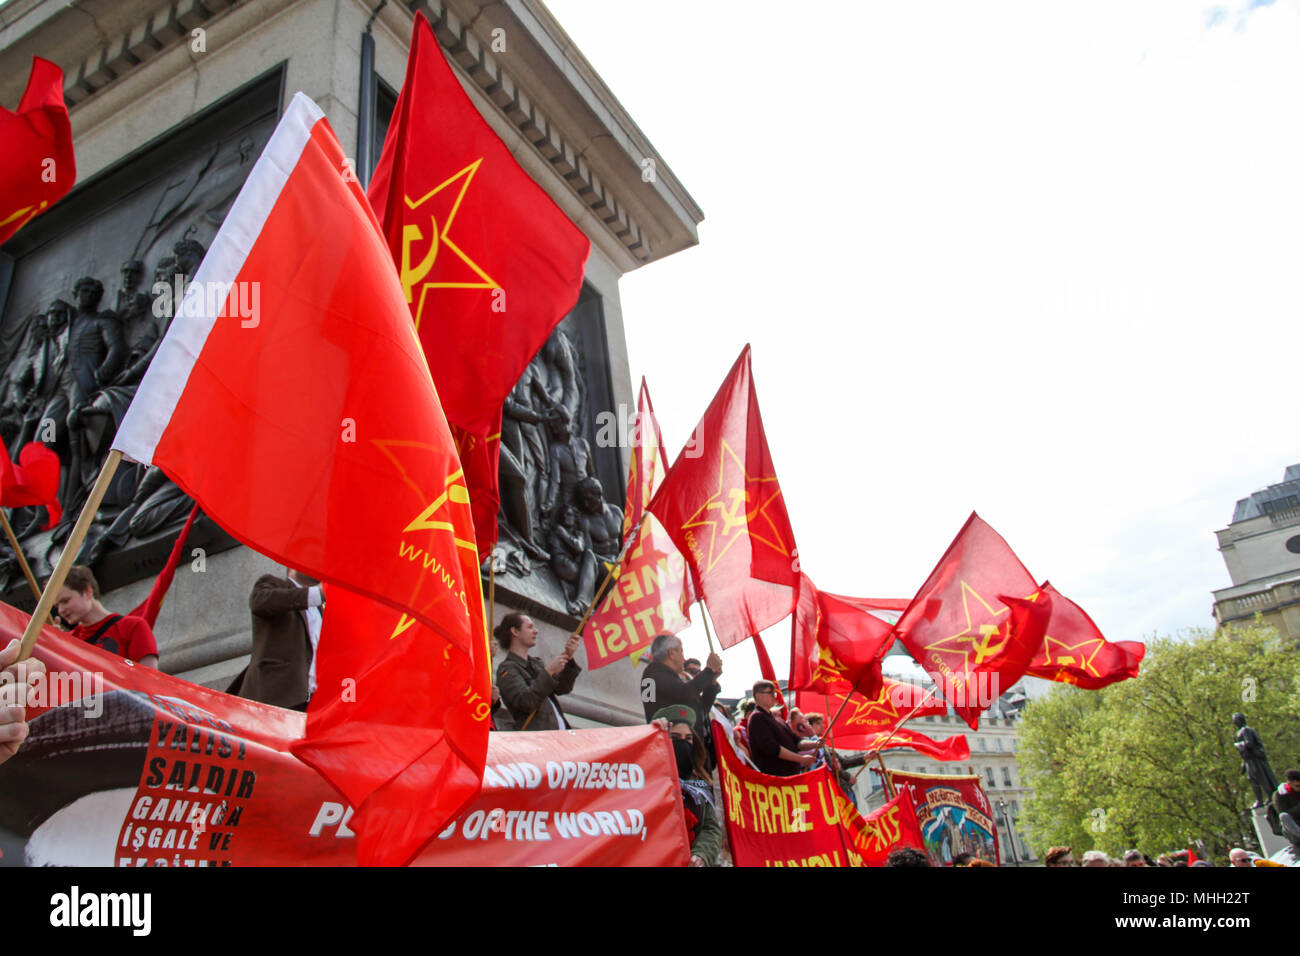 London, UK. 1st May 2018. Communist Party of Great Britain (Marxist-Leninist) at Mayday Credit: Alex Cavendish/Alamy Live News Stock Photo